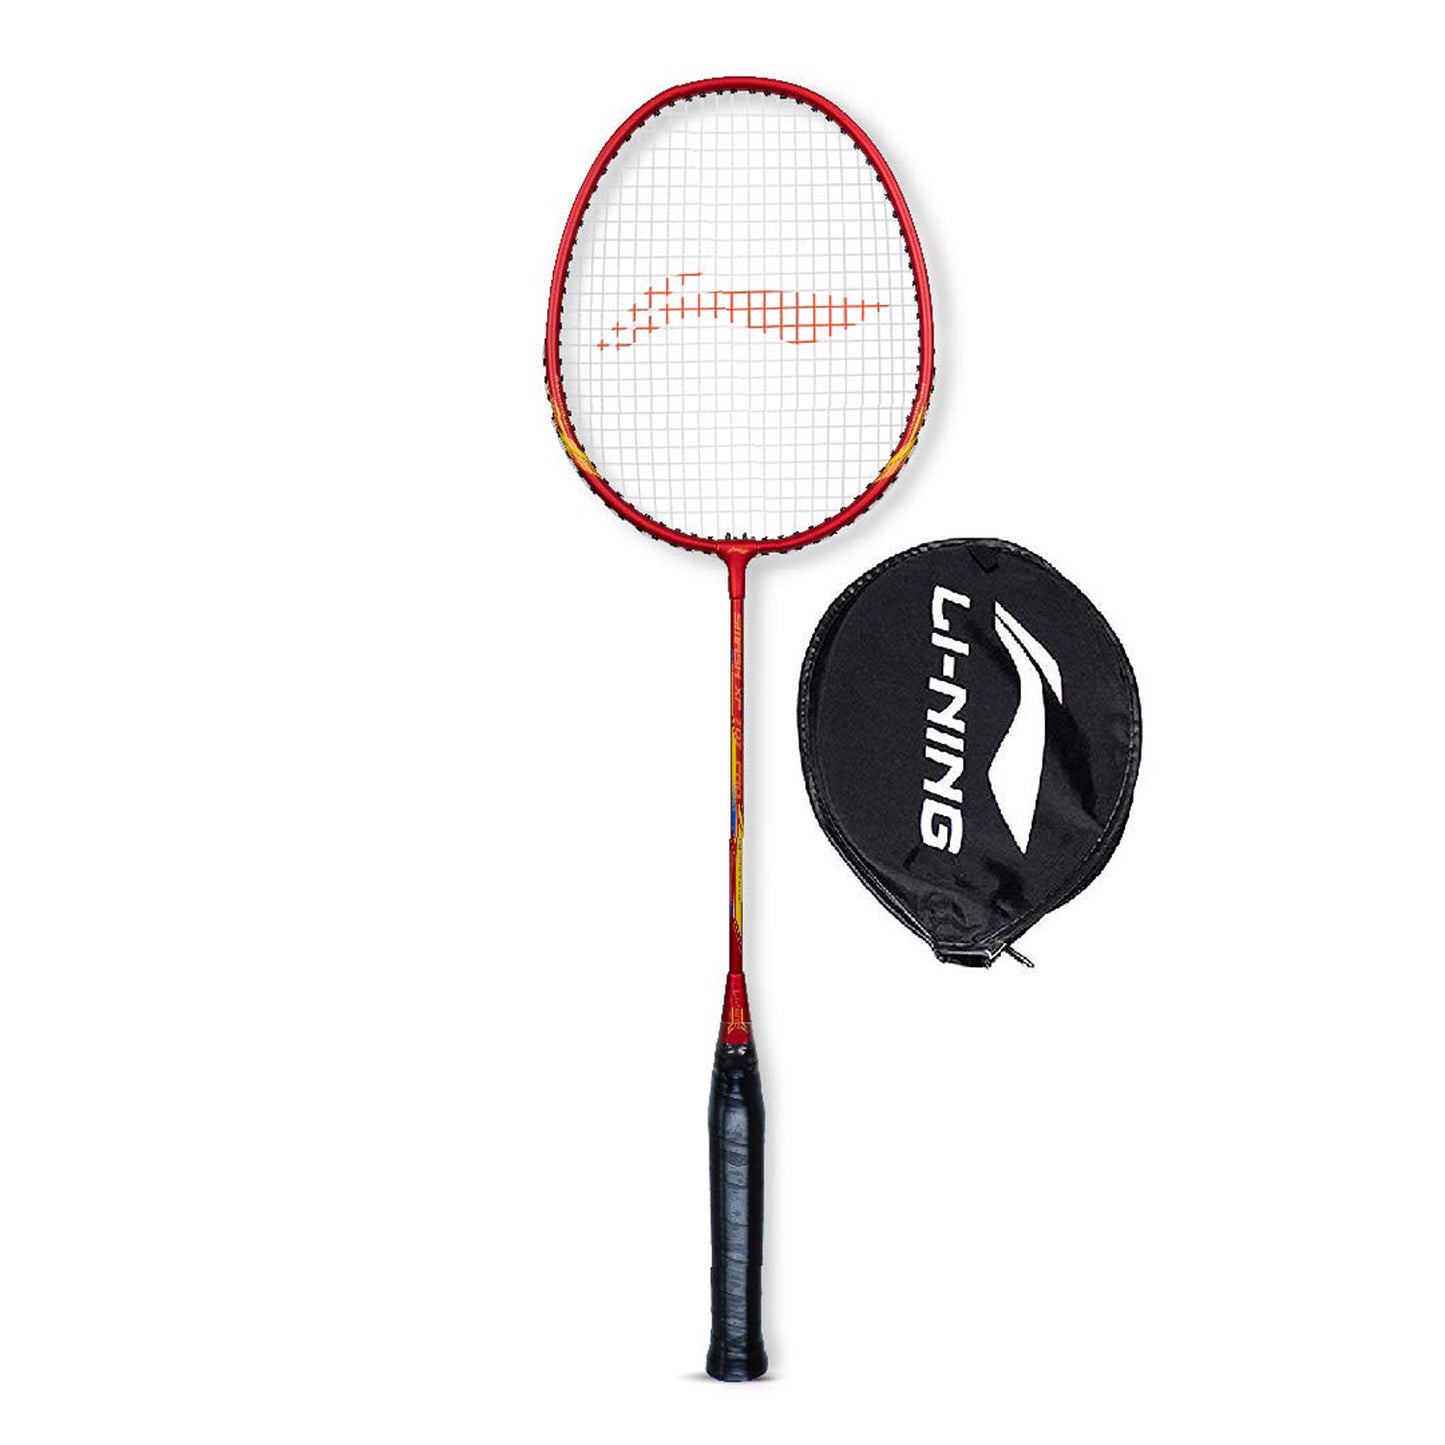 Li-Ning XP 707 PRO Strung Badminton Racket with Free Head Cover, Red/Yellow - Best Price online Prokicksports.com